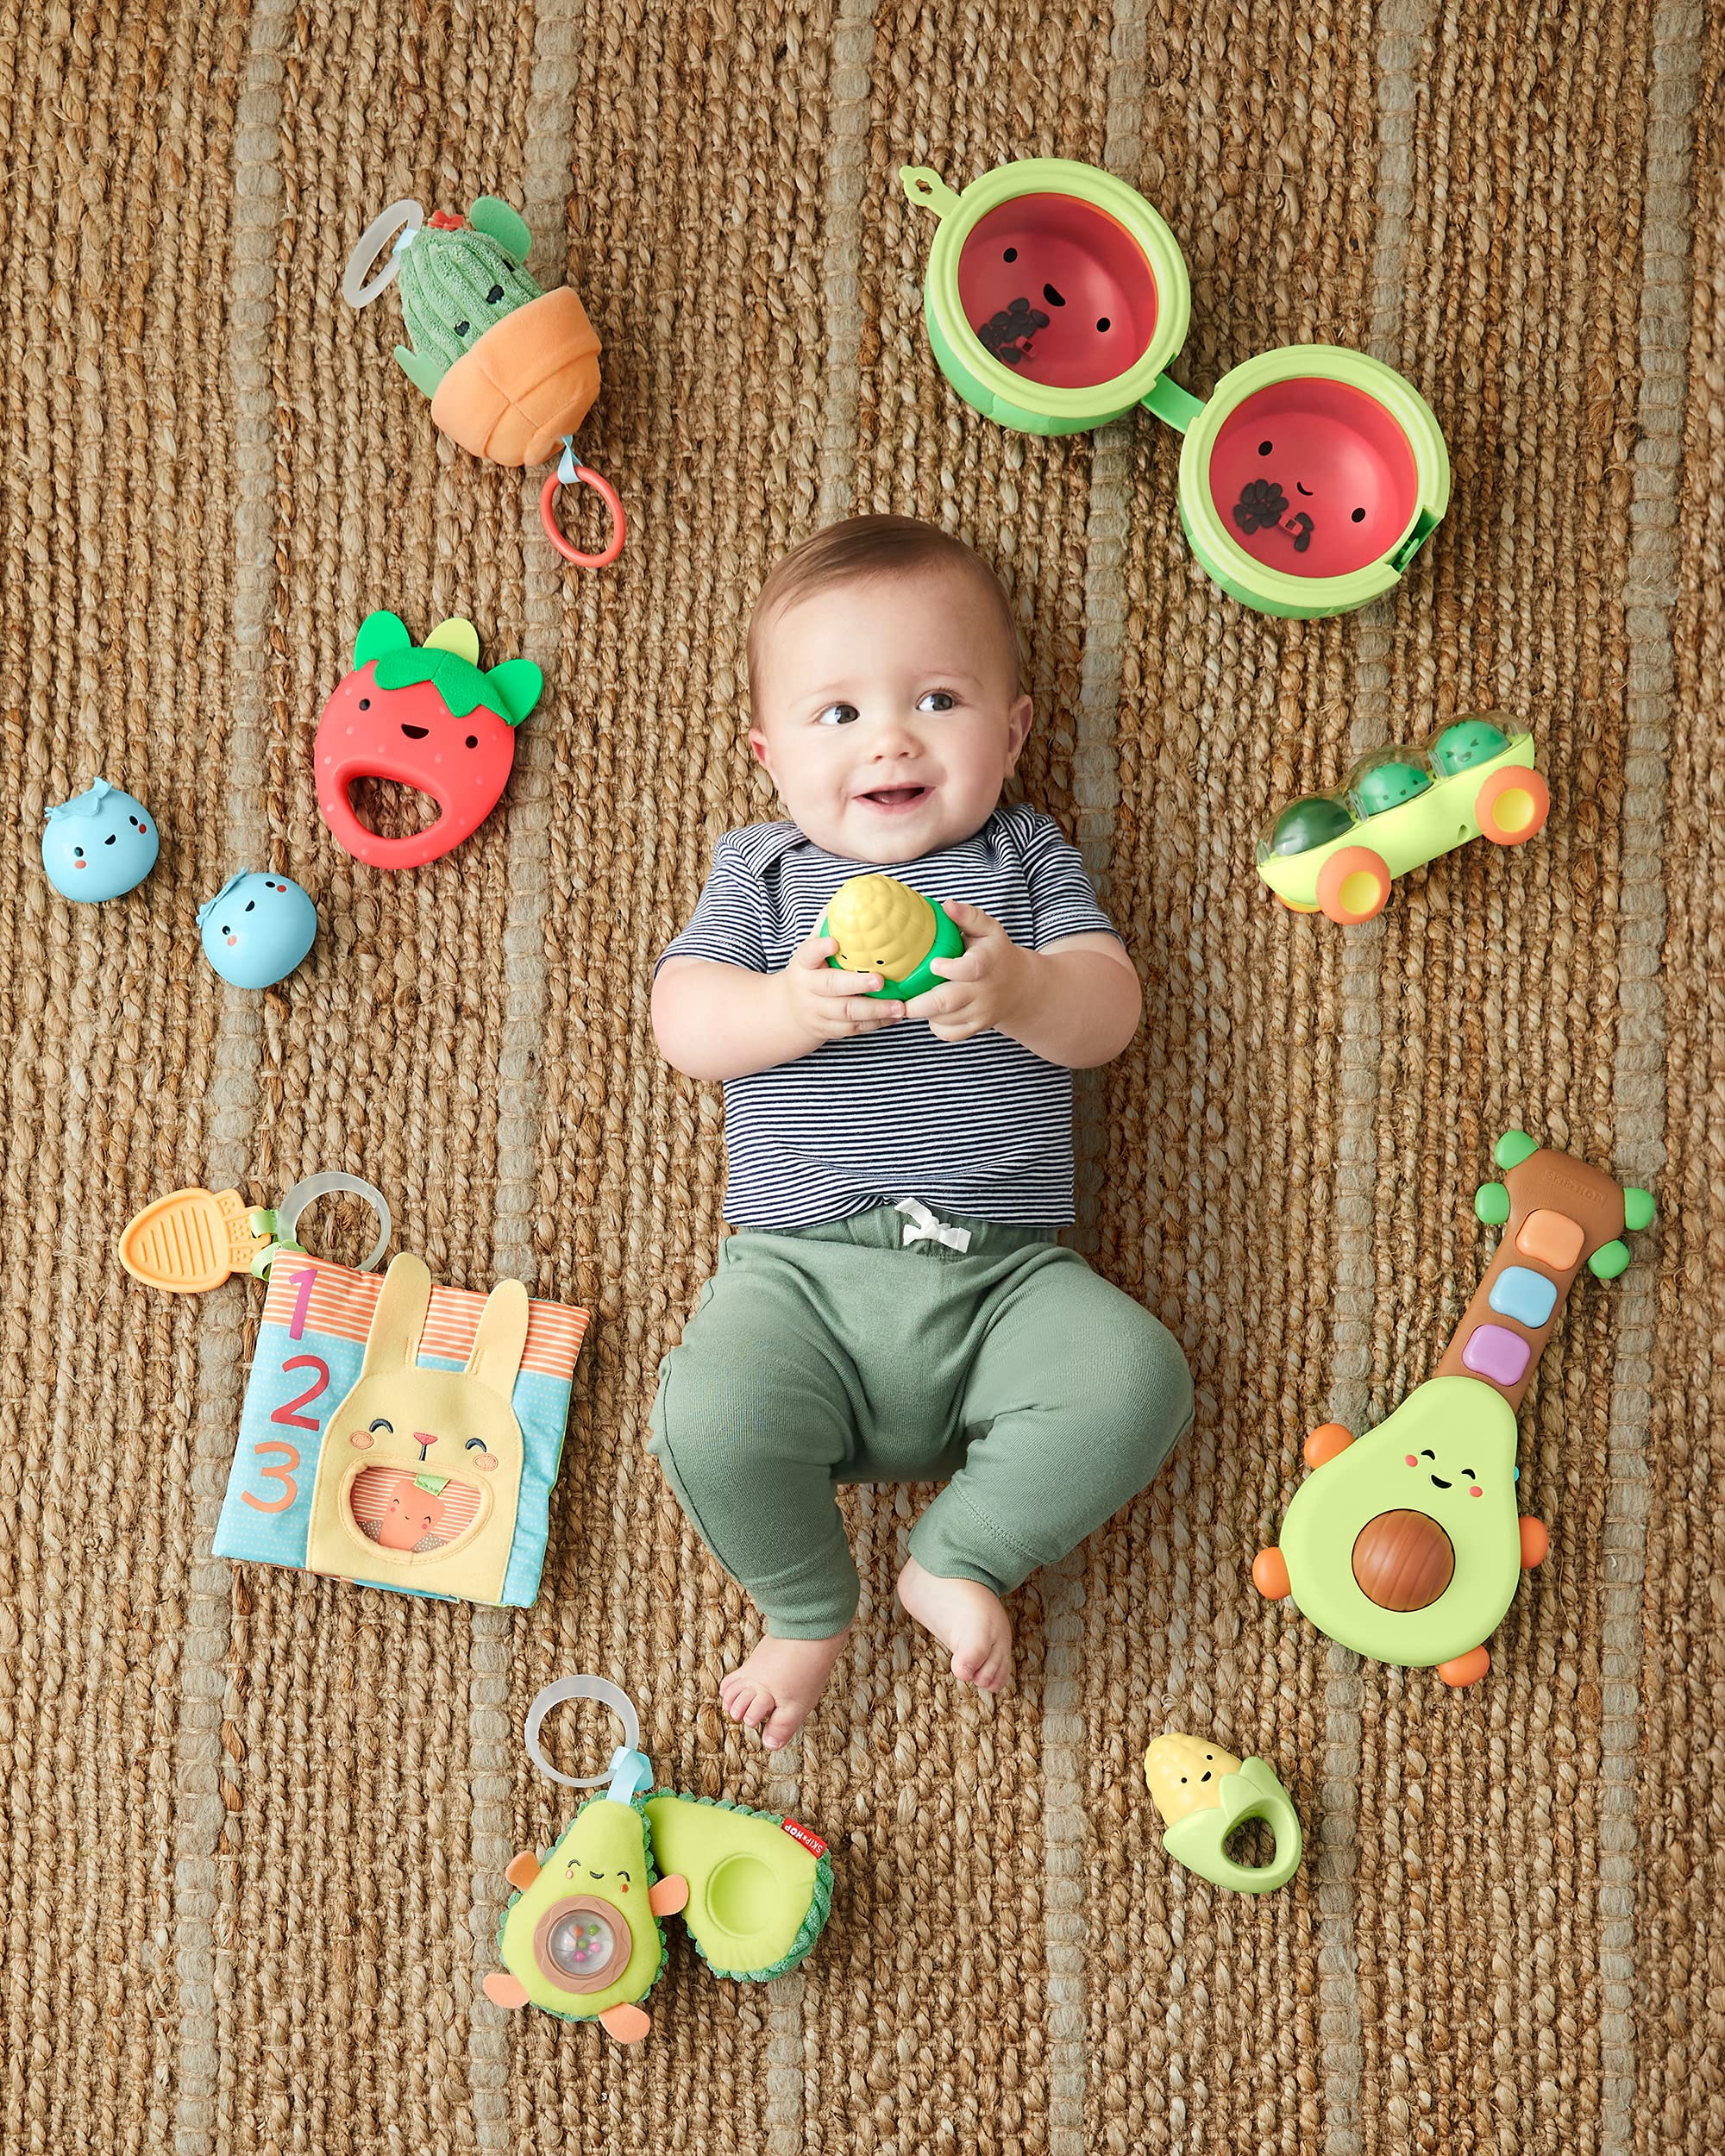 Skip Hop Baby Musical Toy Set, Farmstand, Berry Cute Band